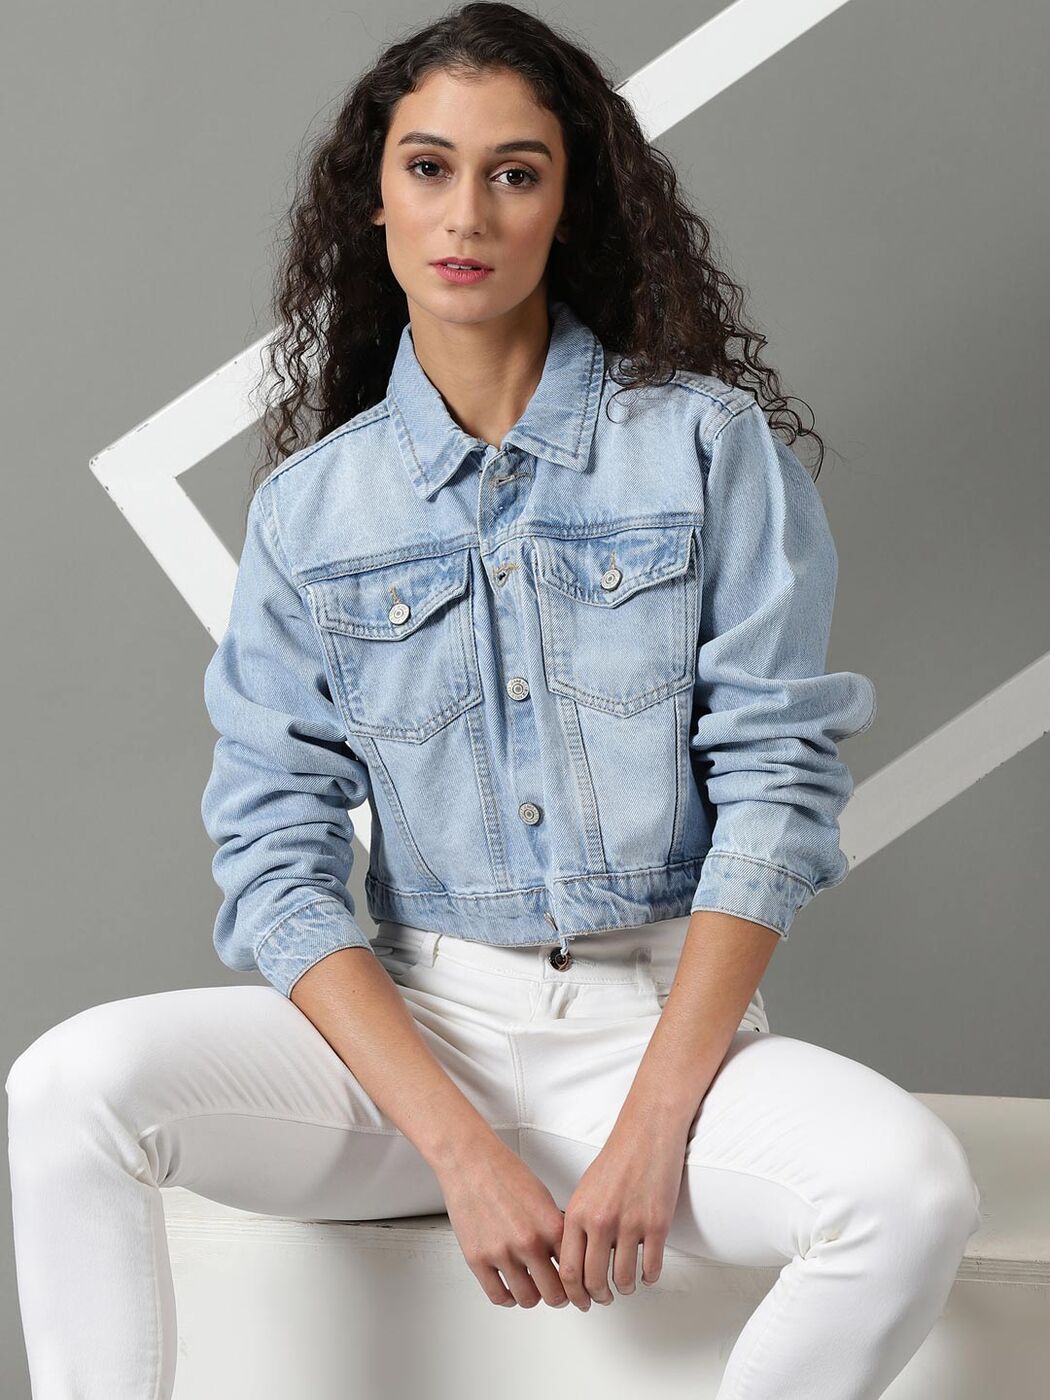 Buy CLO CLU Full Sleeves Stylish Comfort Fit Regular Collar Dark Blue Denim  Jacket for Women and Size (S) at Amazon.in